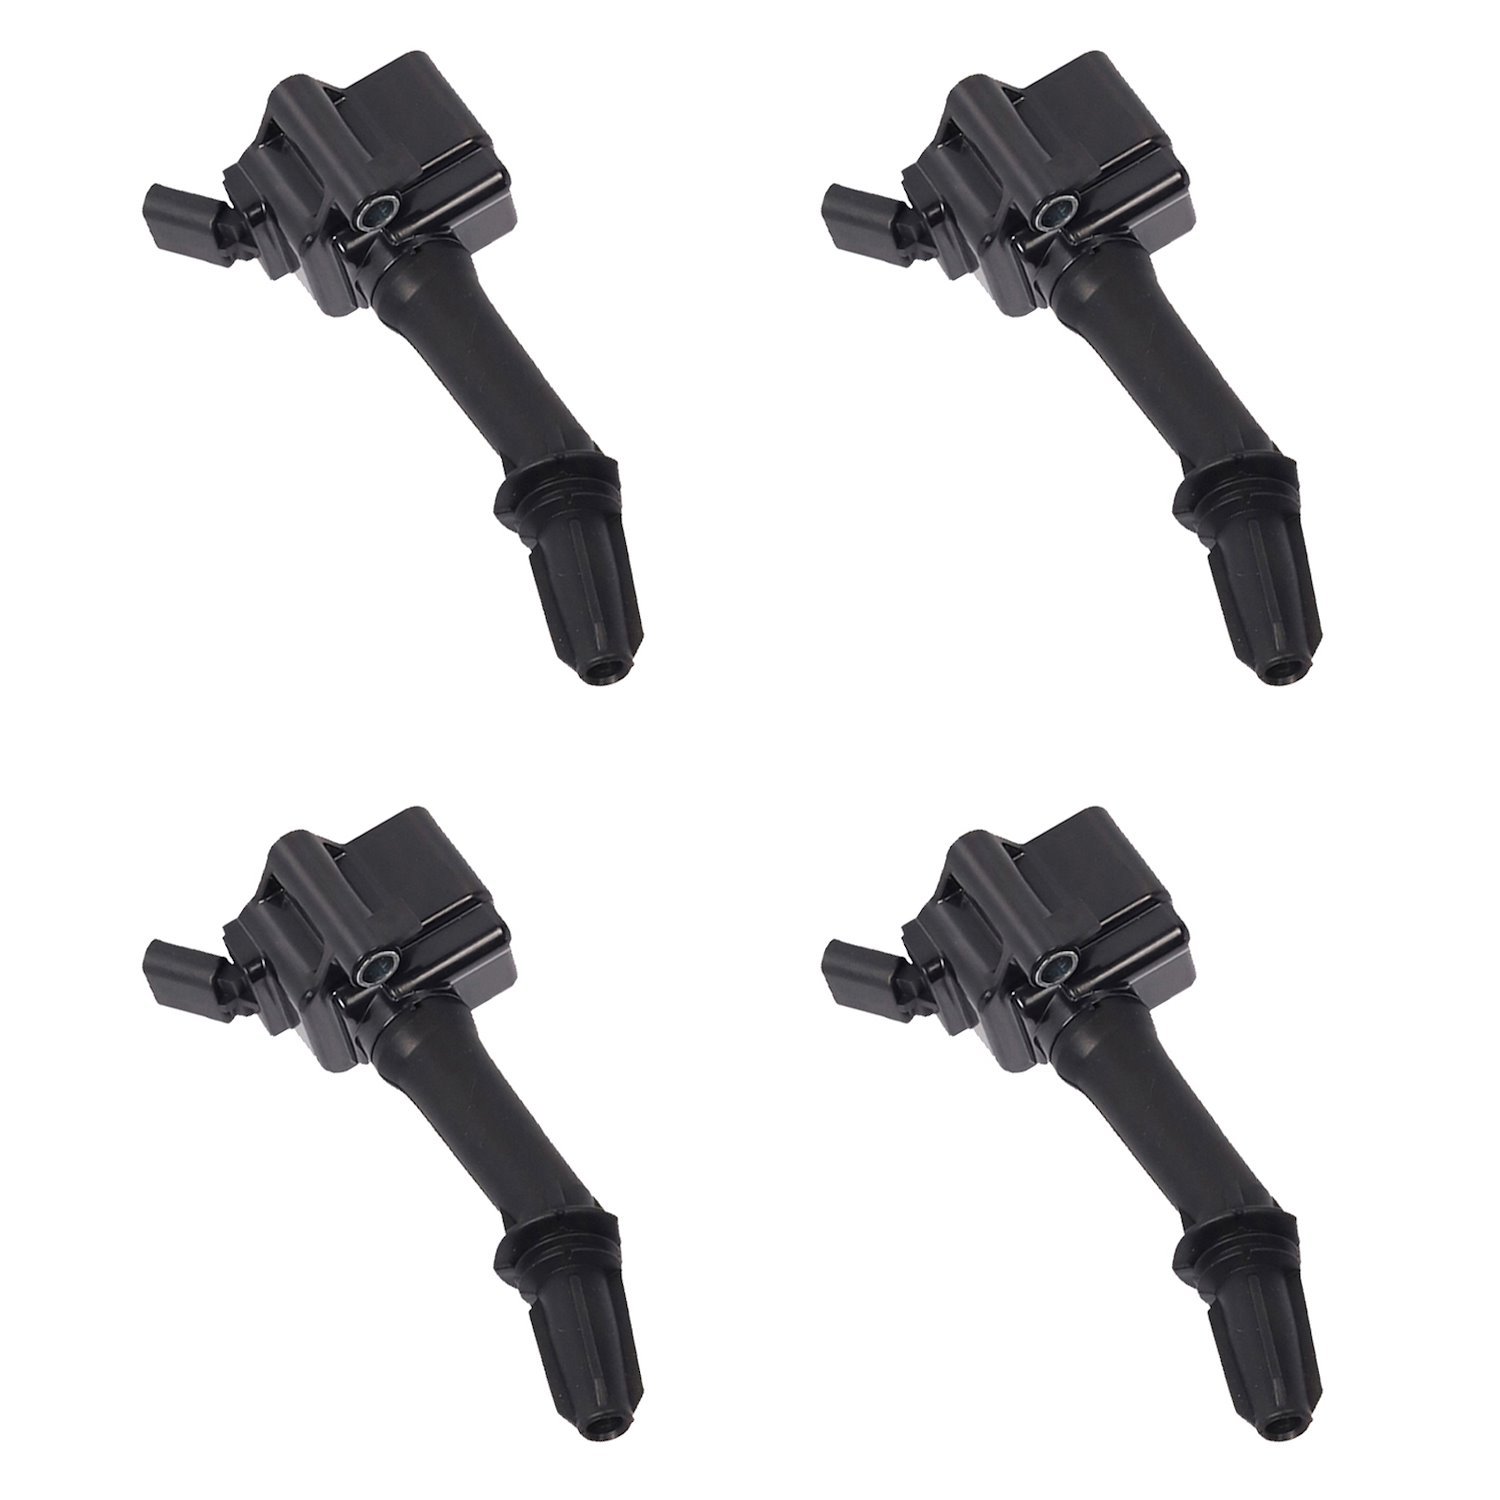 OE Replacement Ignition Coils for Turbocharged Chevrolet Malibu,